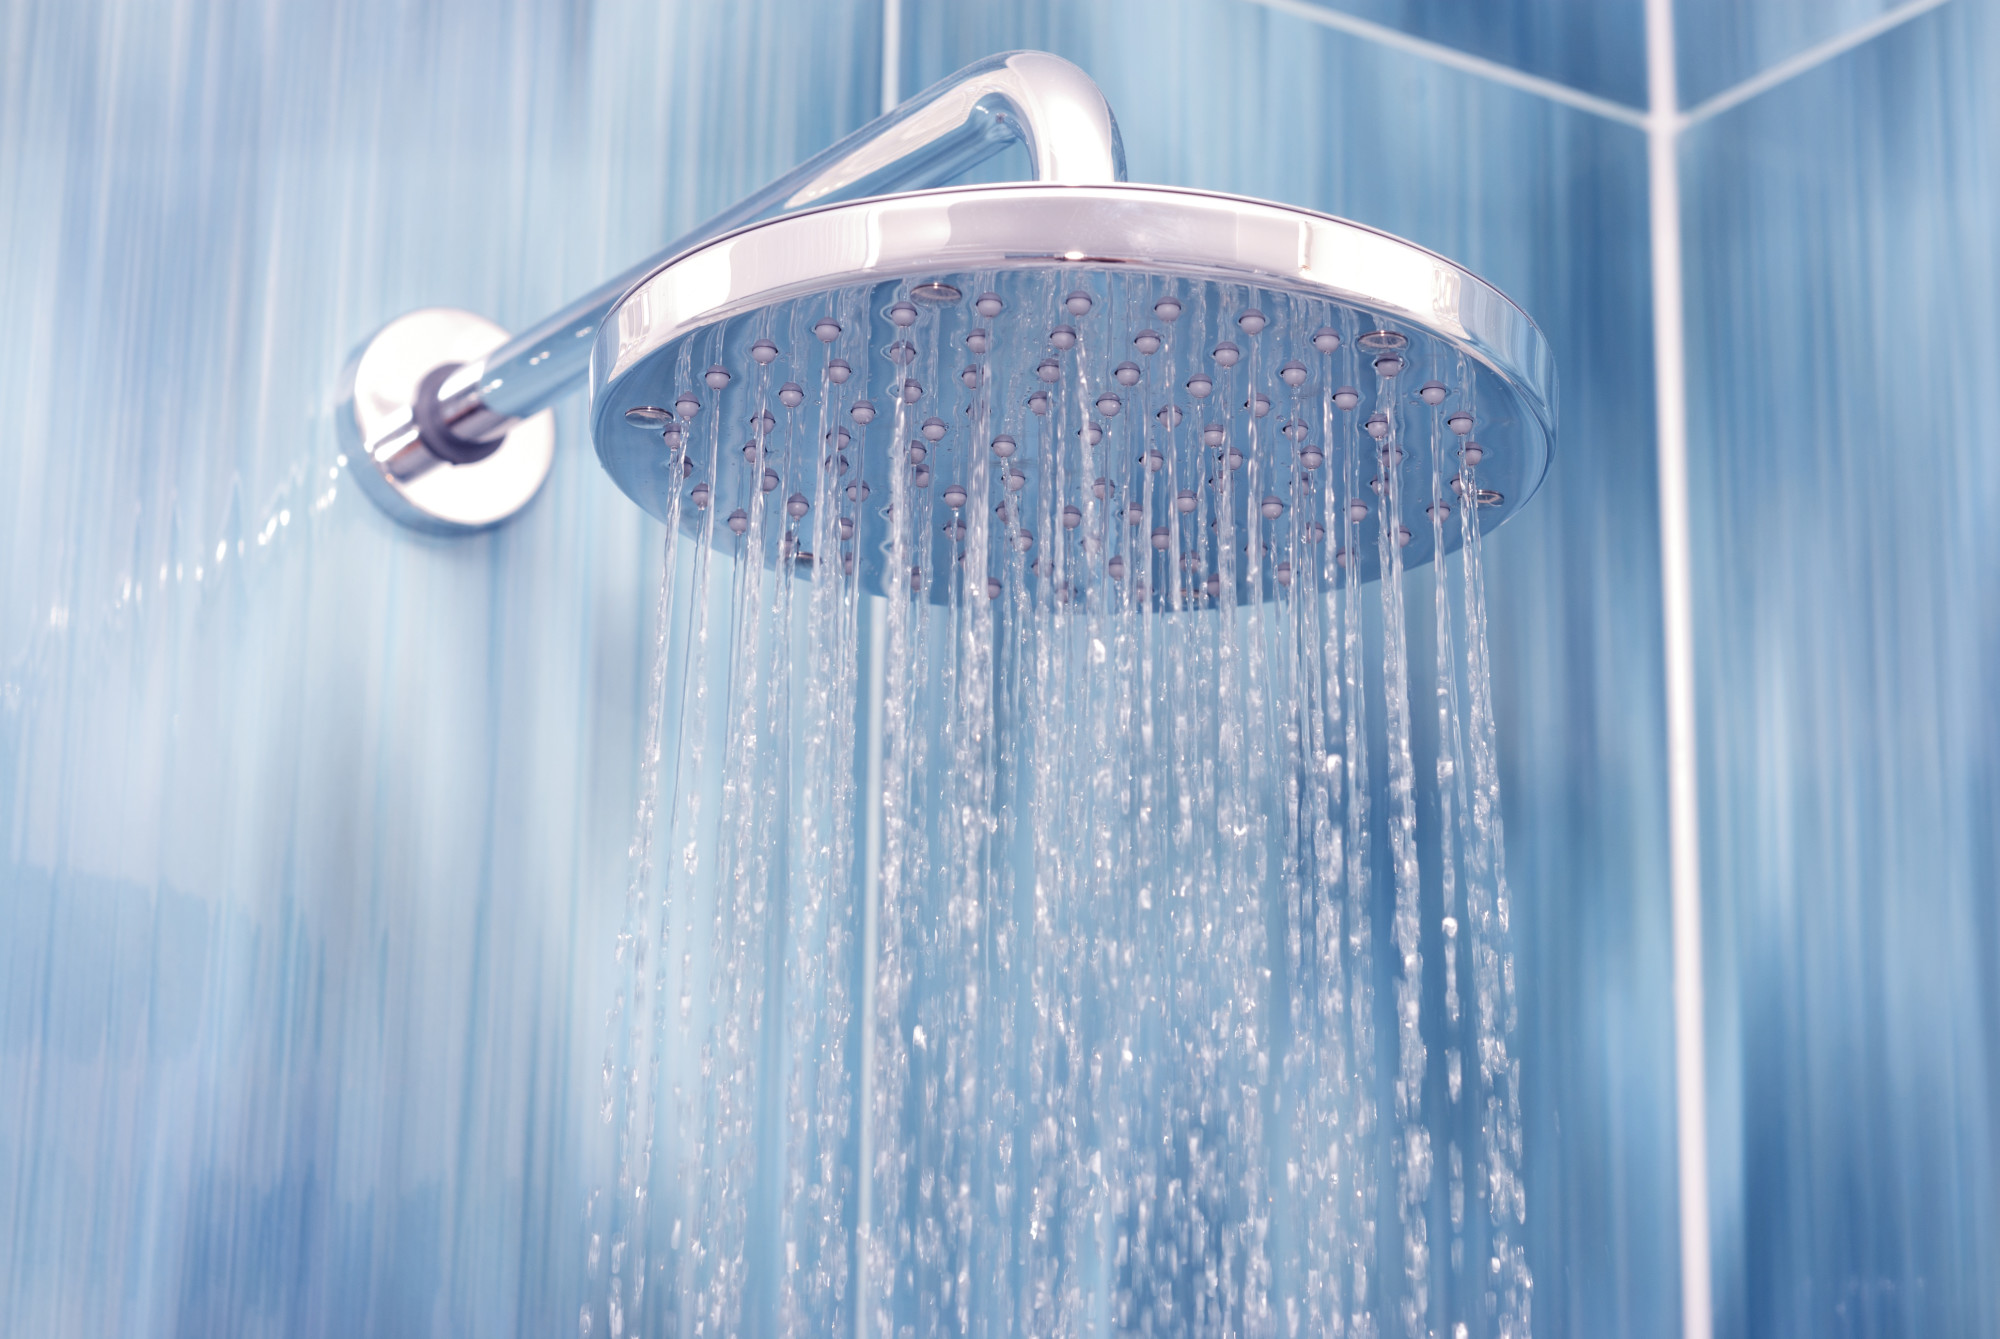 With so many options available when shopping for the perfect fixture, explore how to choose a shower head and important factors to consider.